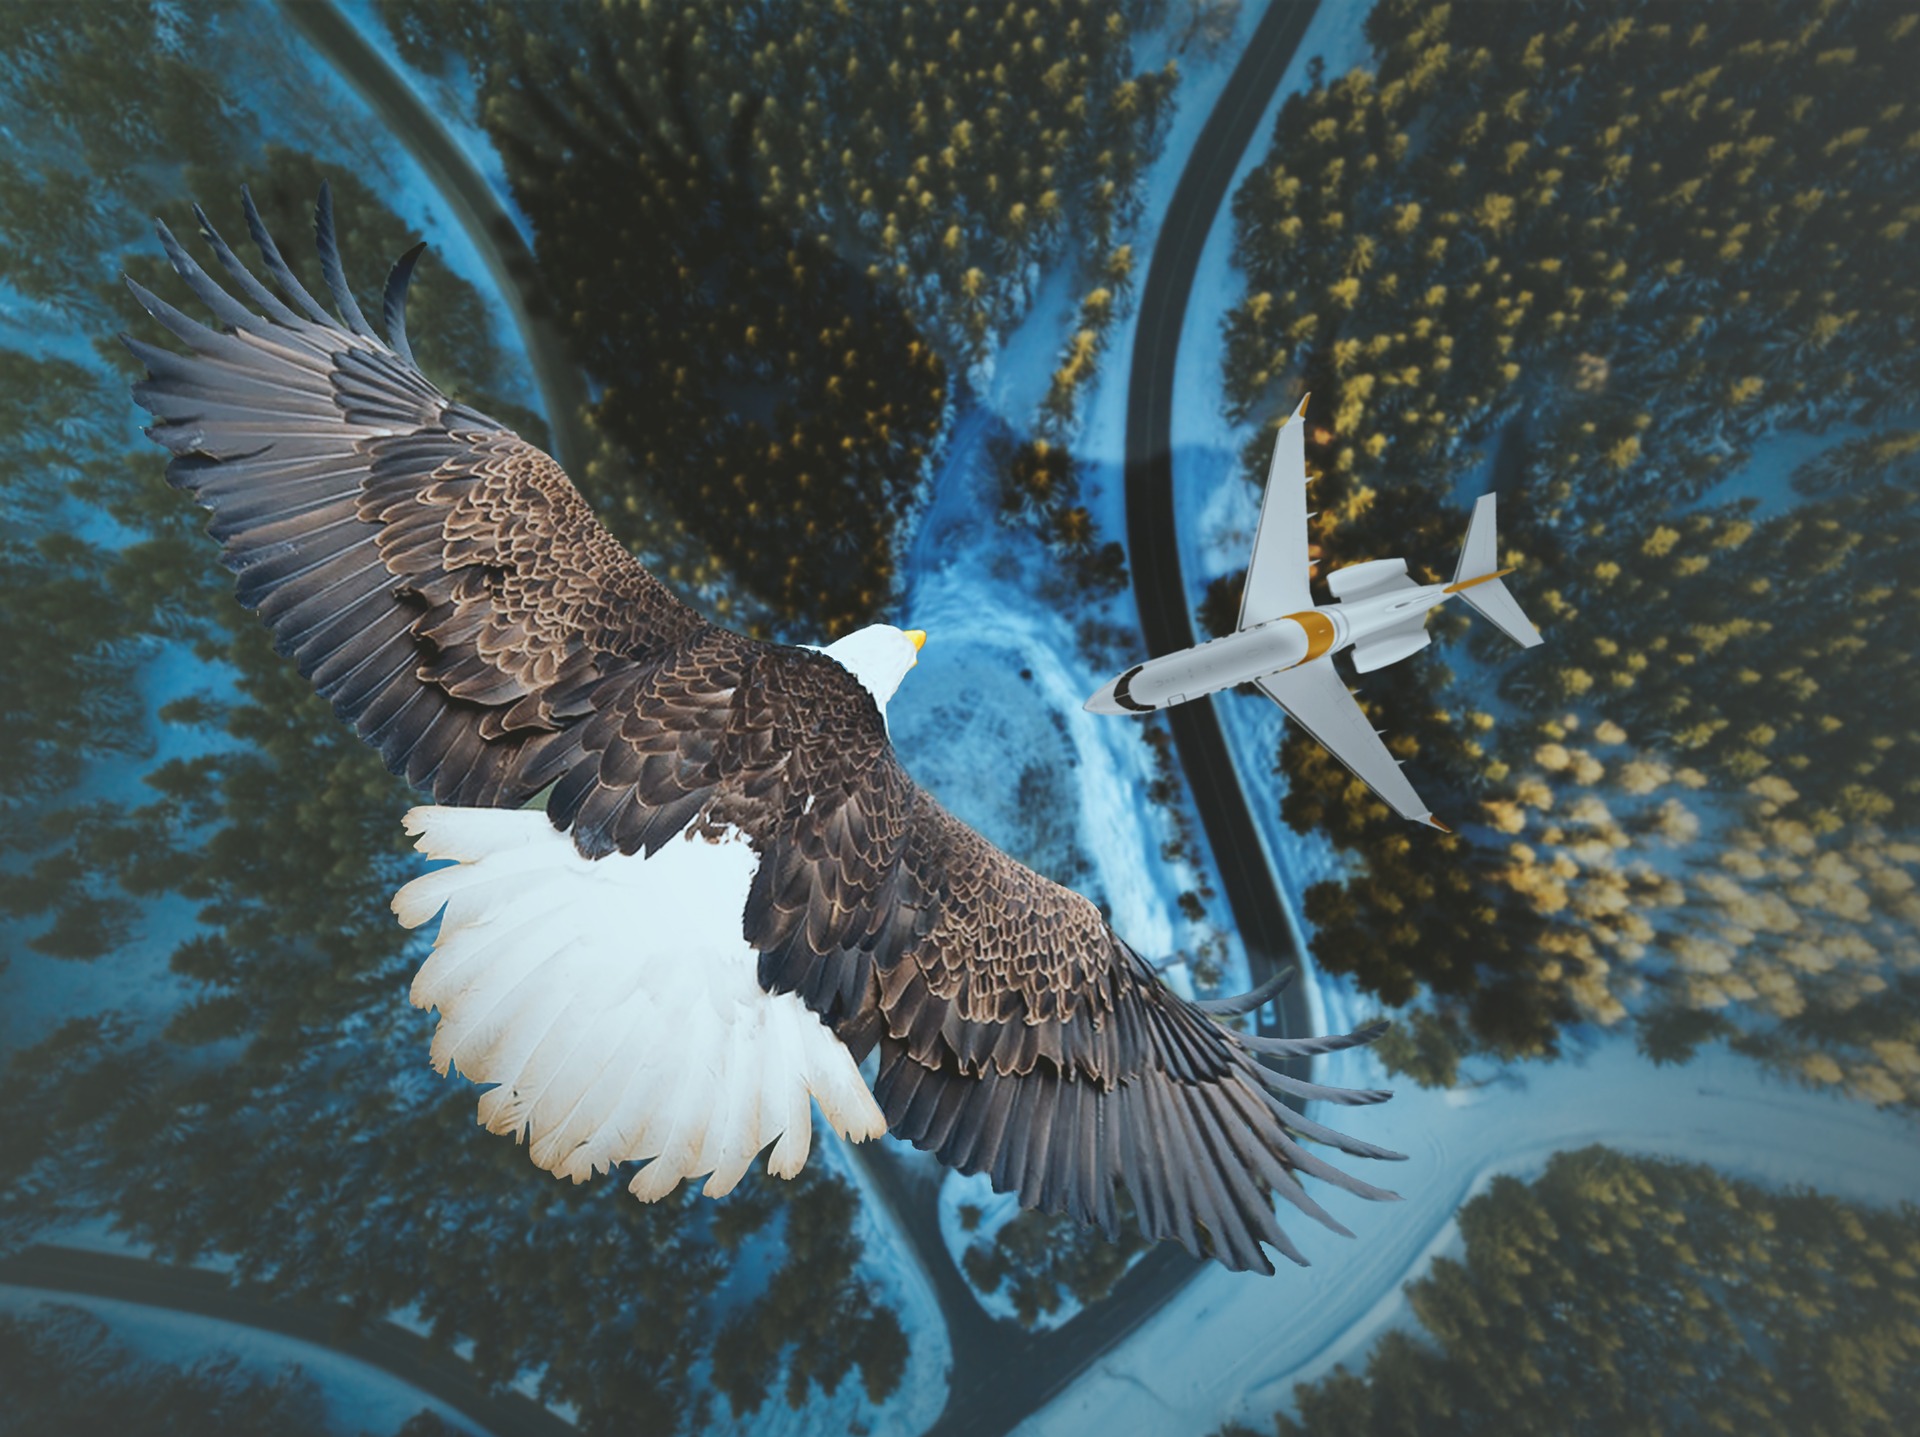 An eagle flies over a plane and a snowy forest.